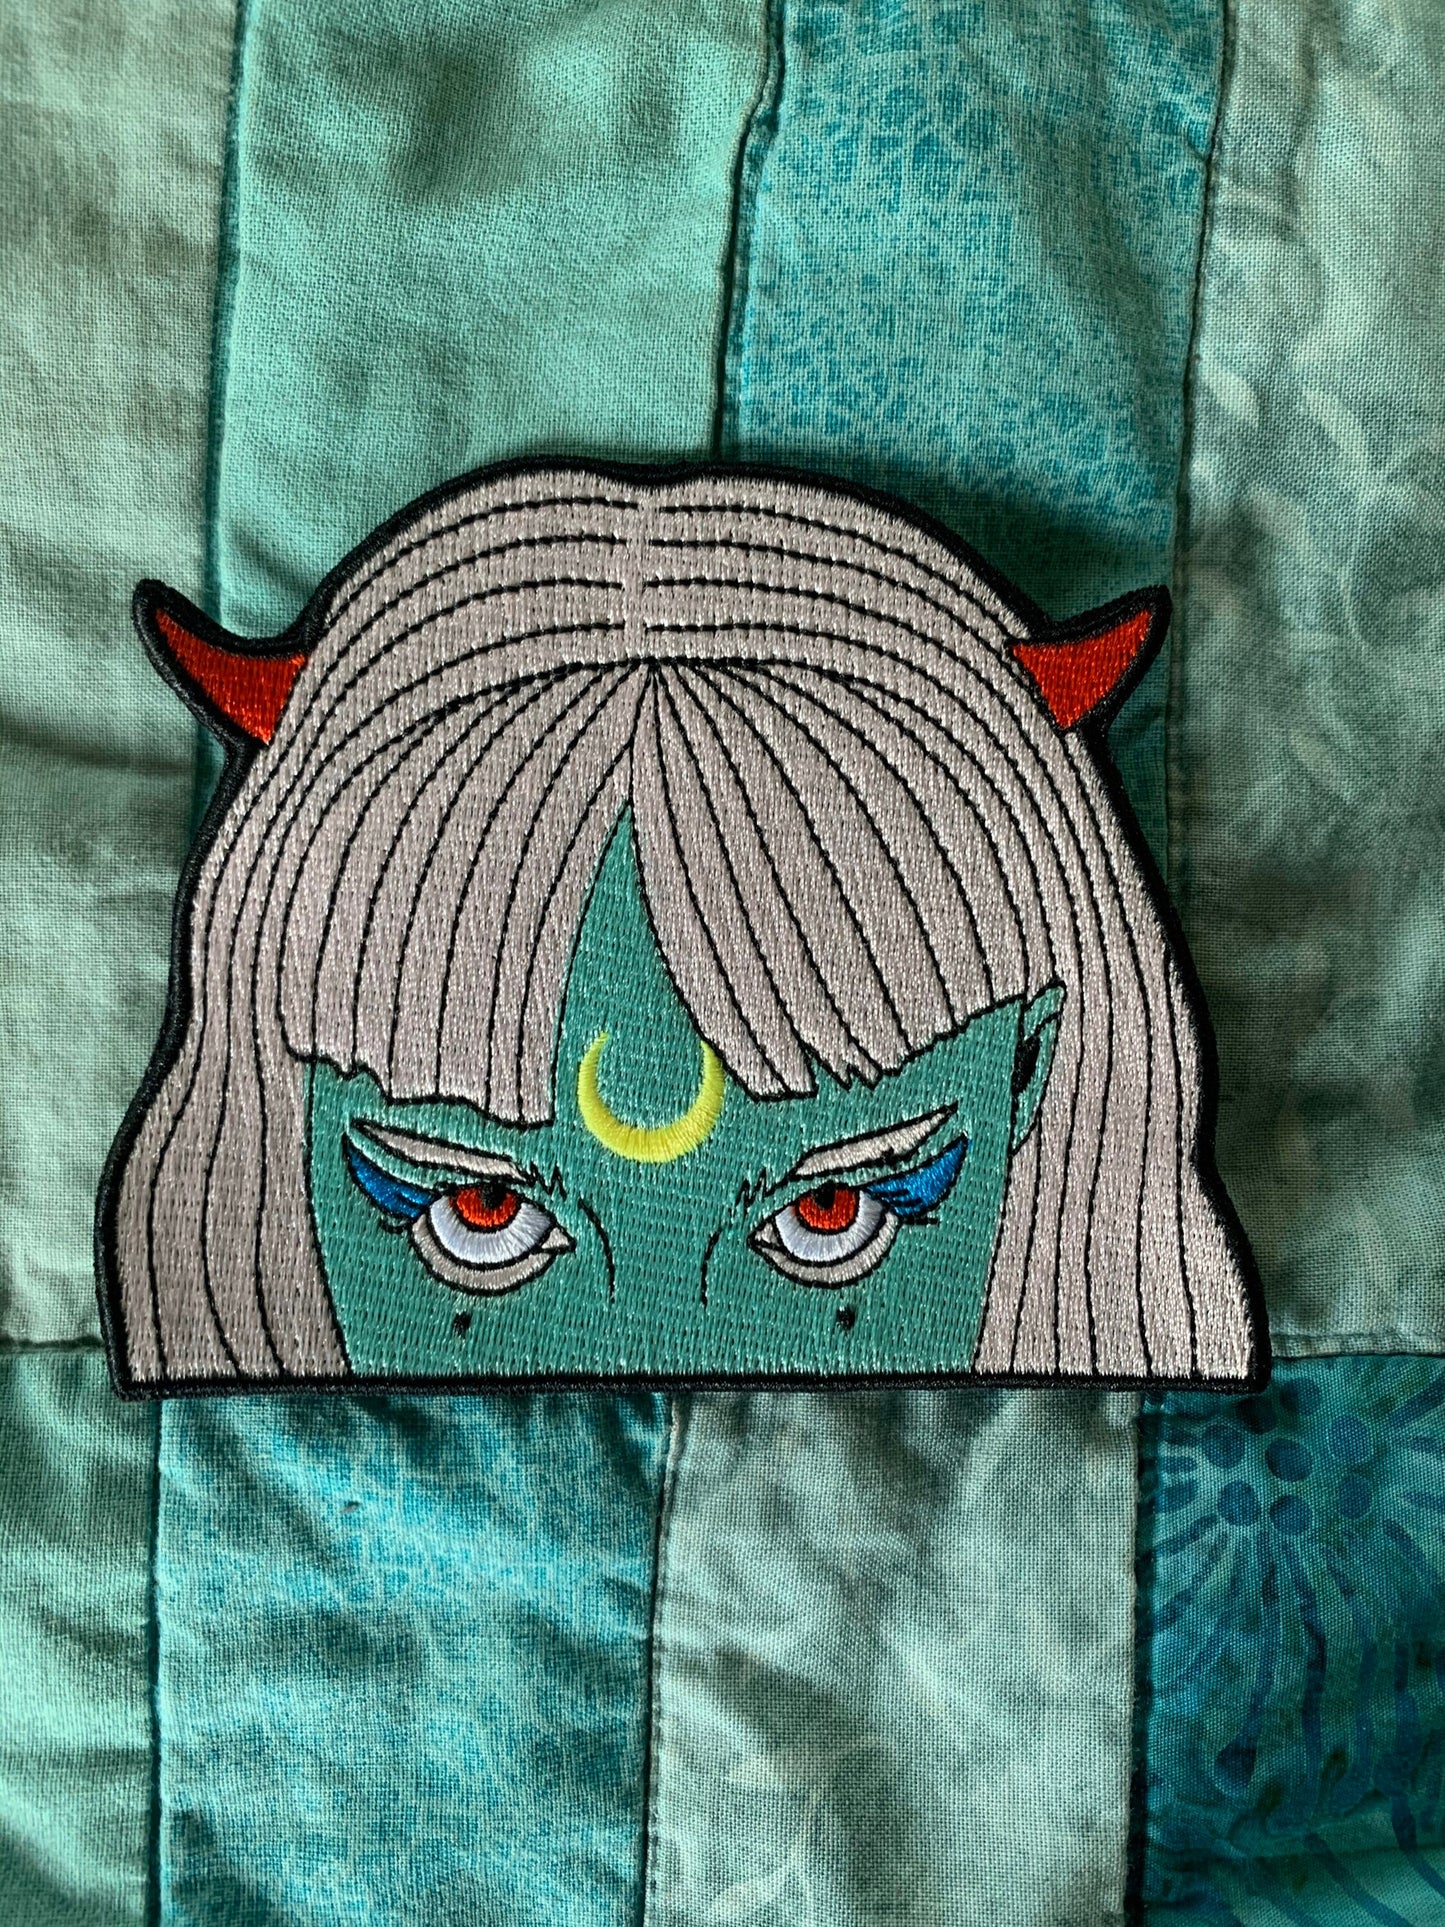 Moon Power Tarot embroidered patch